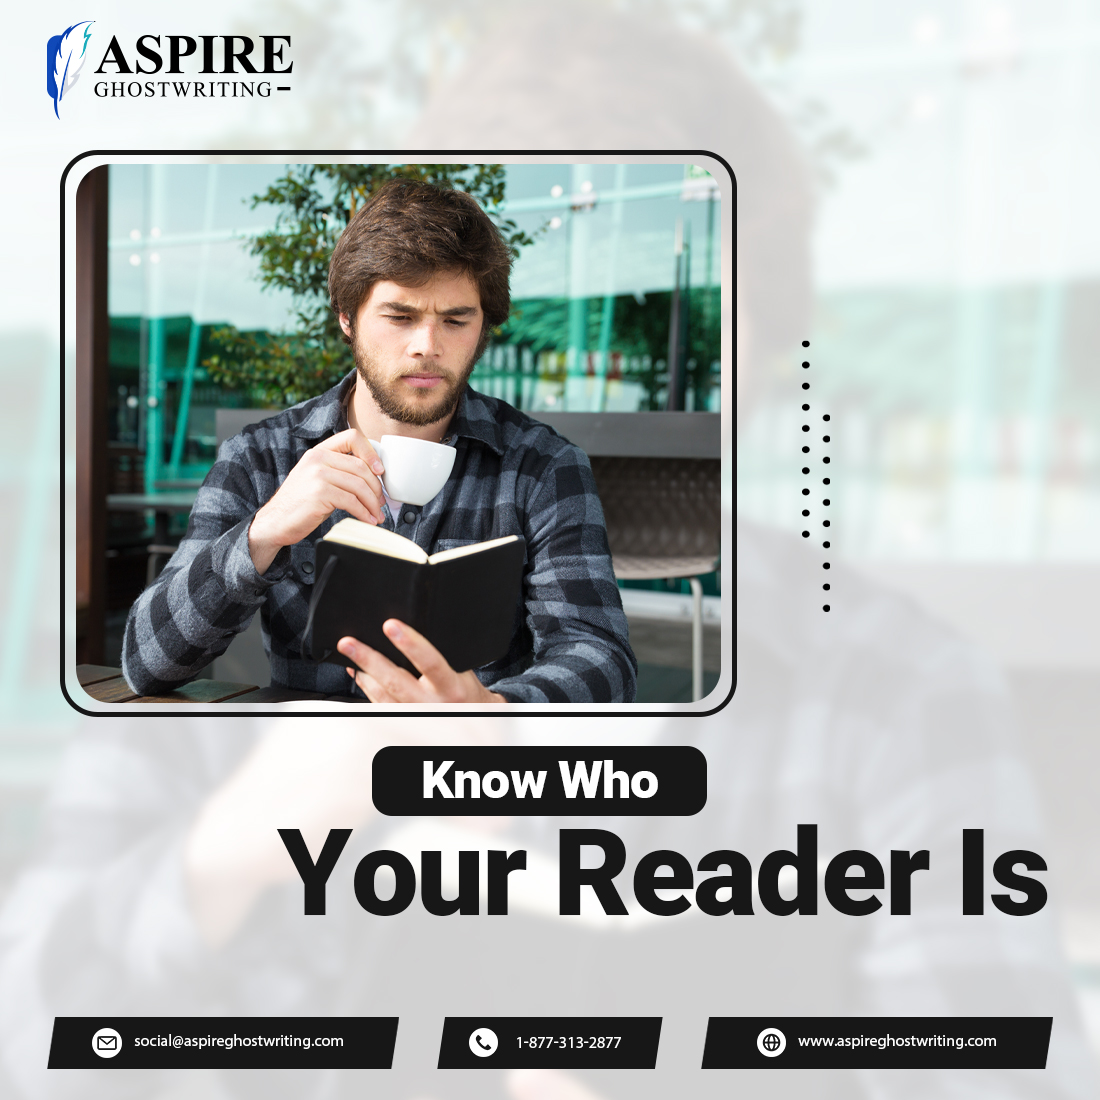 Our Research and Marketing team is here to assist you in identifying your target audience more effectively by searching the demographics, psychographics, and preferences.

#aspireghostwriting #bookmarketing #bookpublishing #bookwriting #bookediting #bookcoverdesign